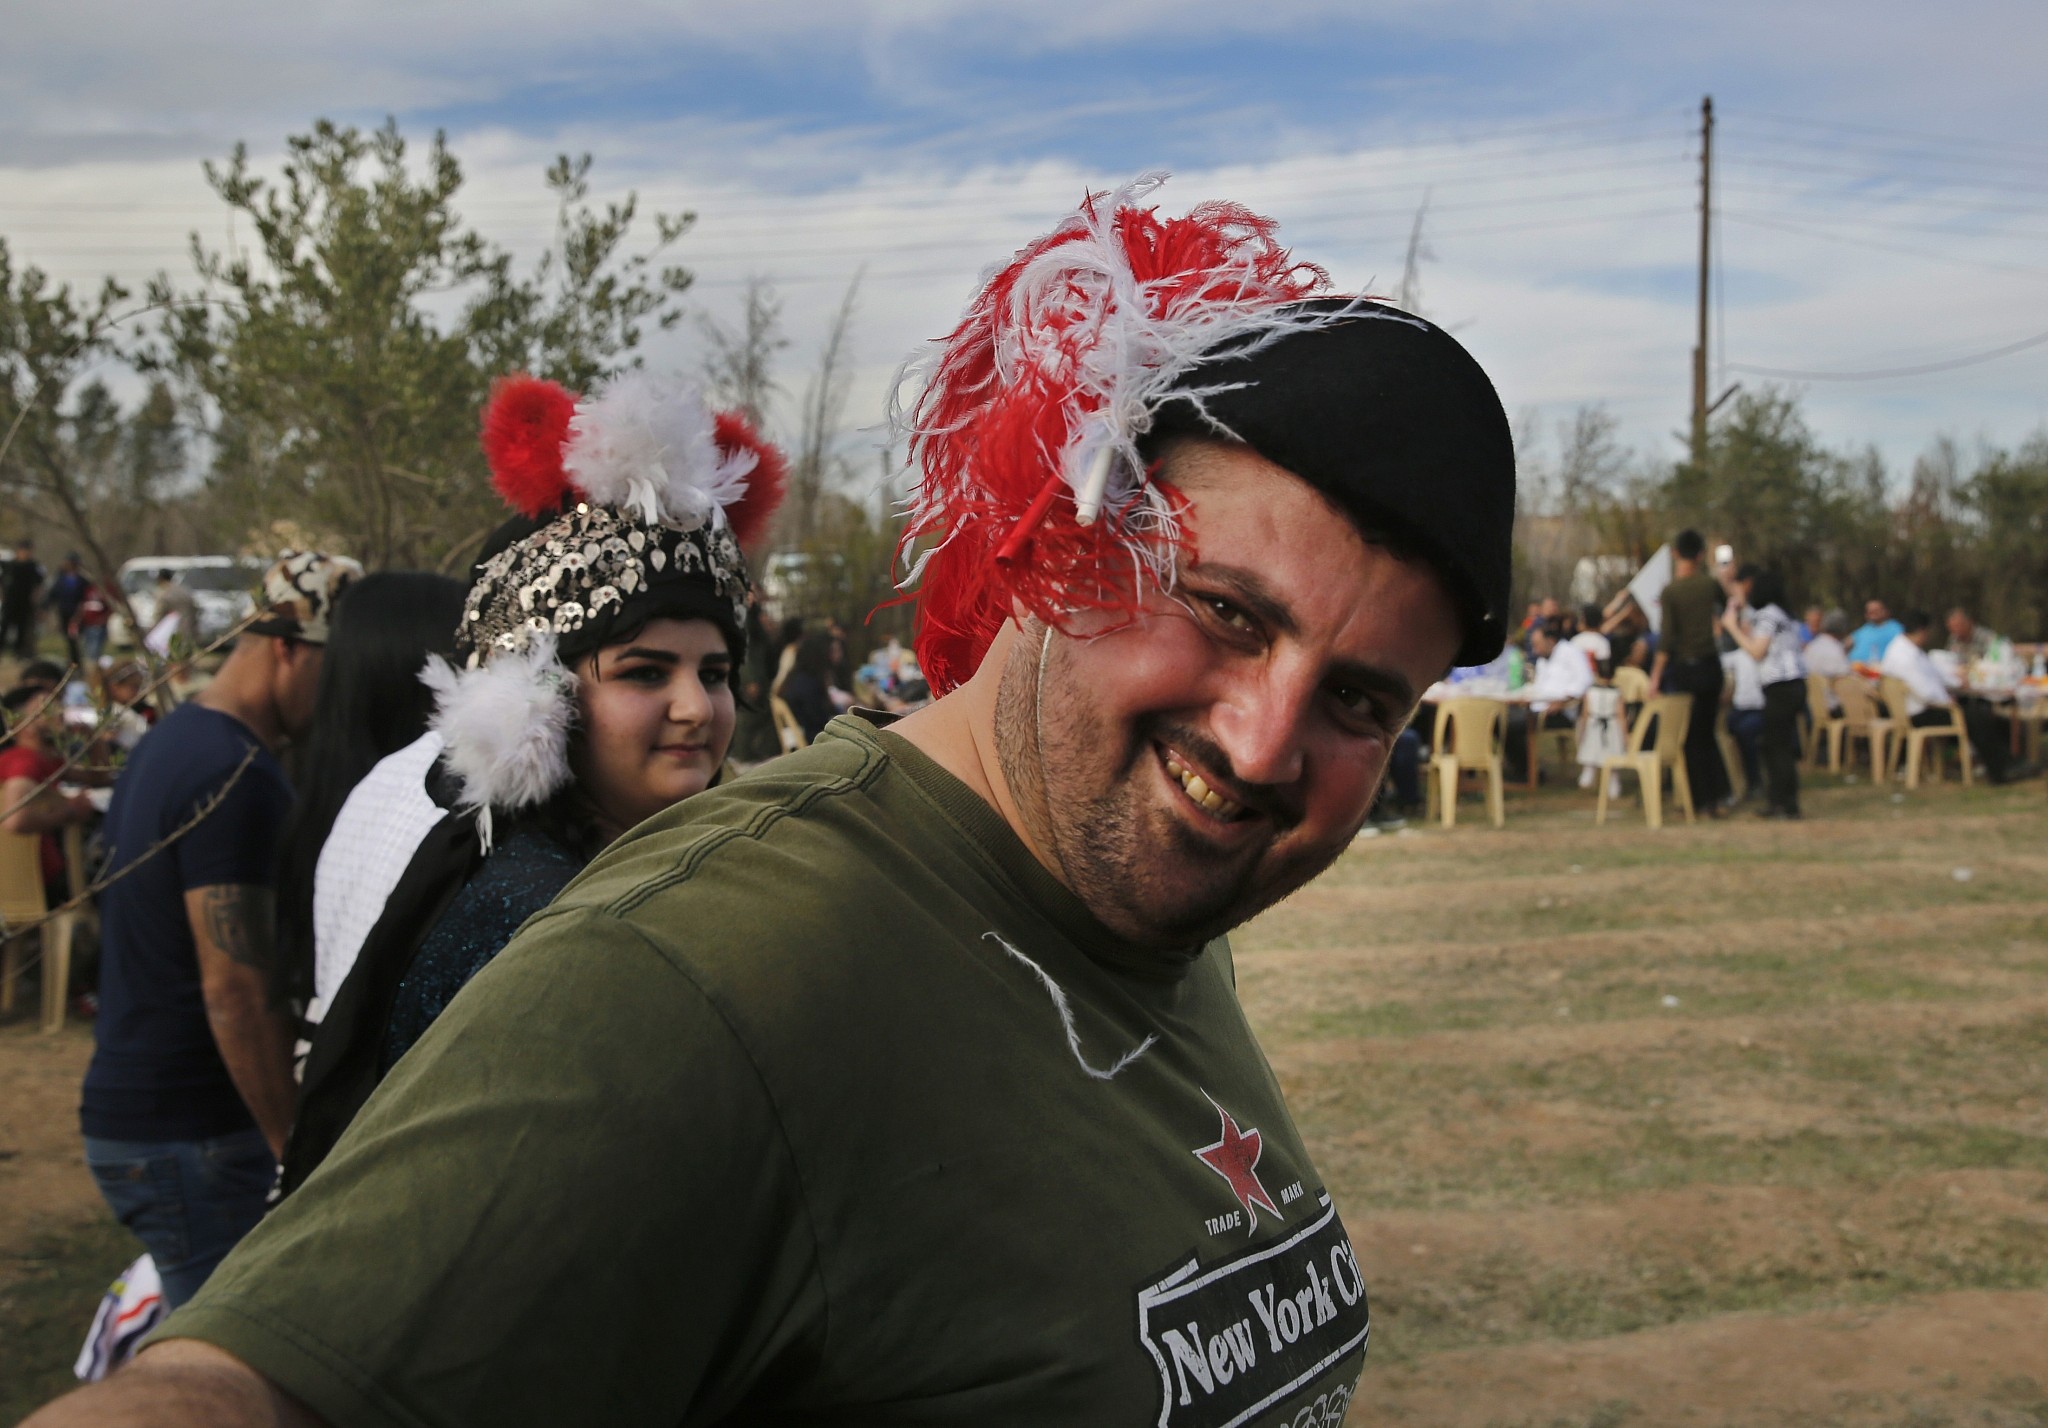 Traditional Costumes from Christian Villages in Iraq